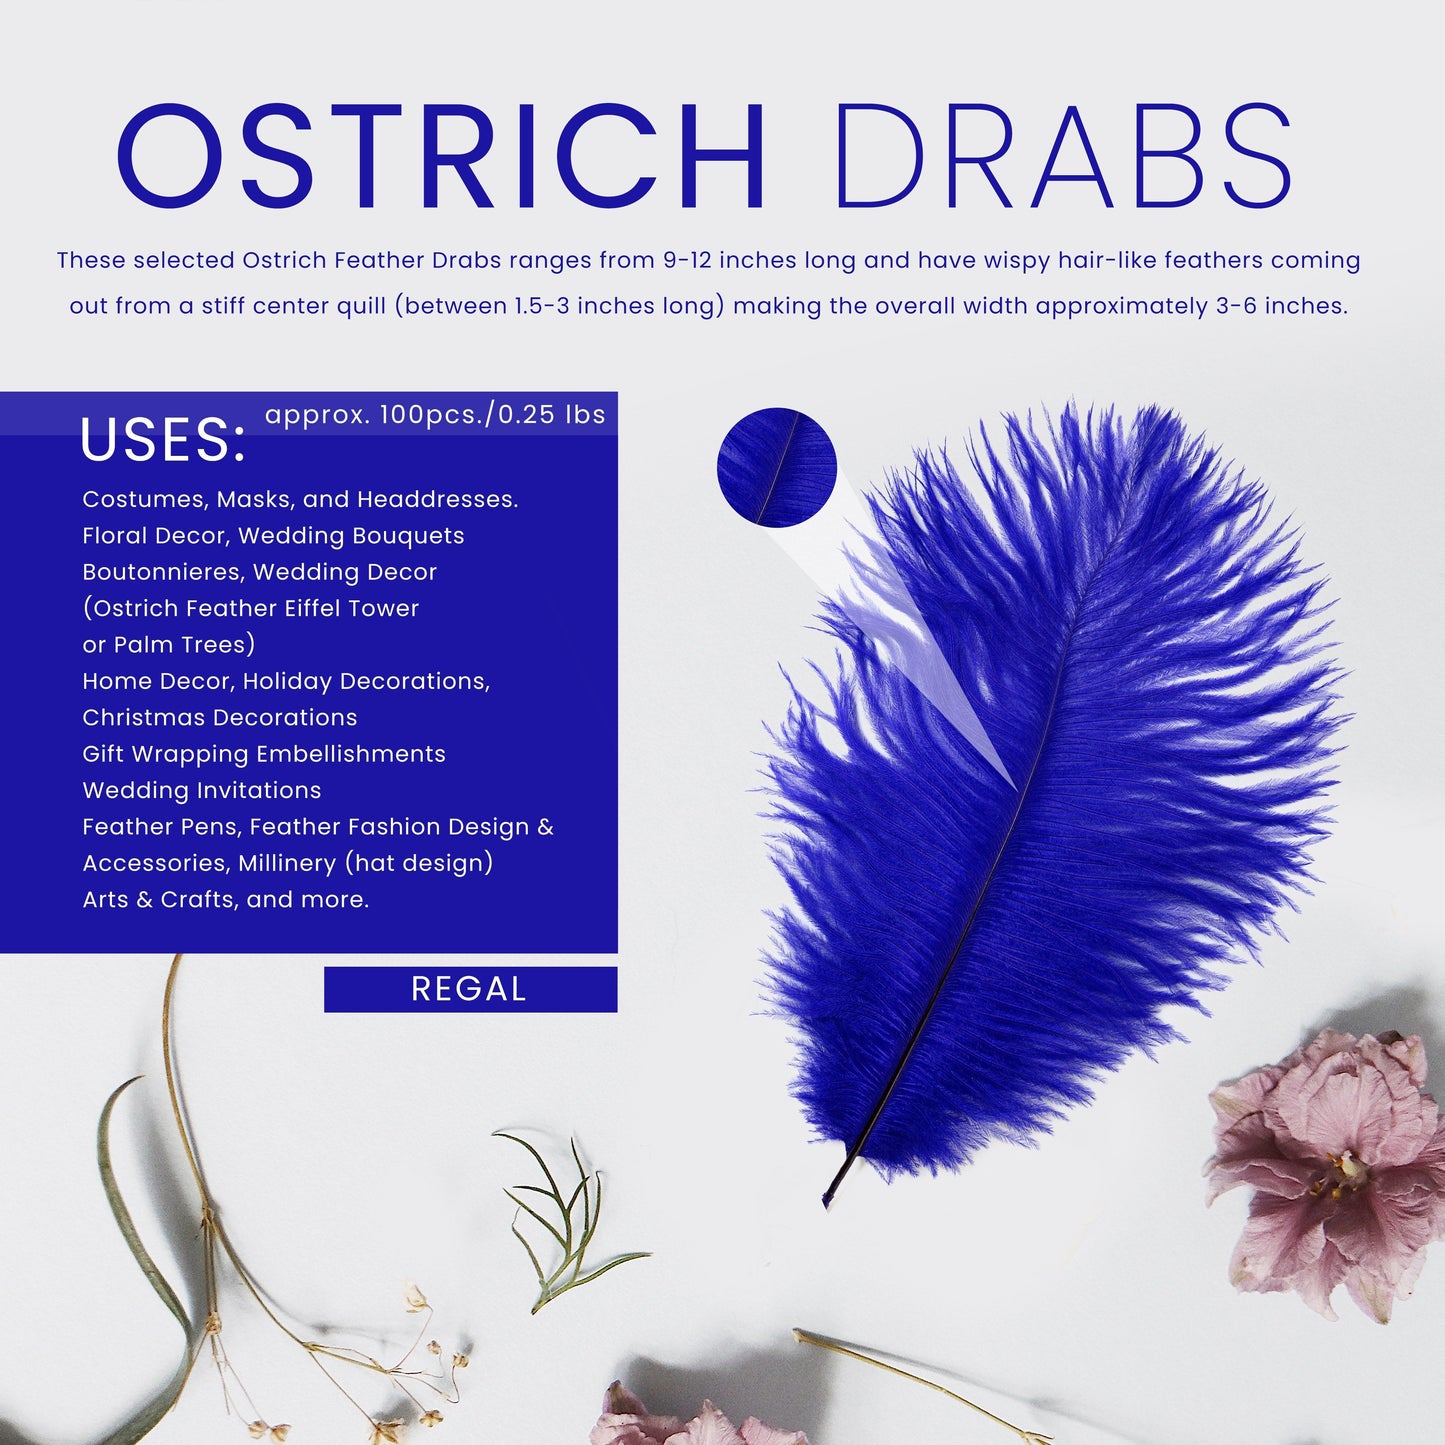 Ostrich Feathers 9-12" Drabs - Regal